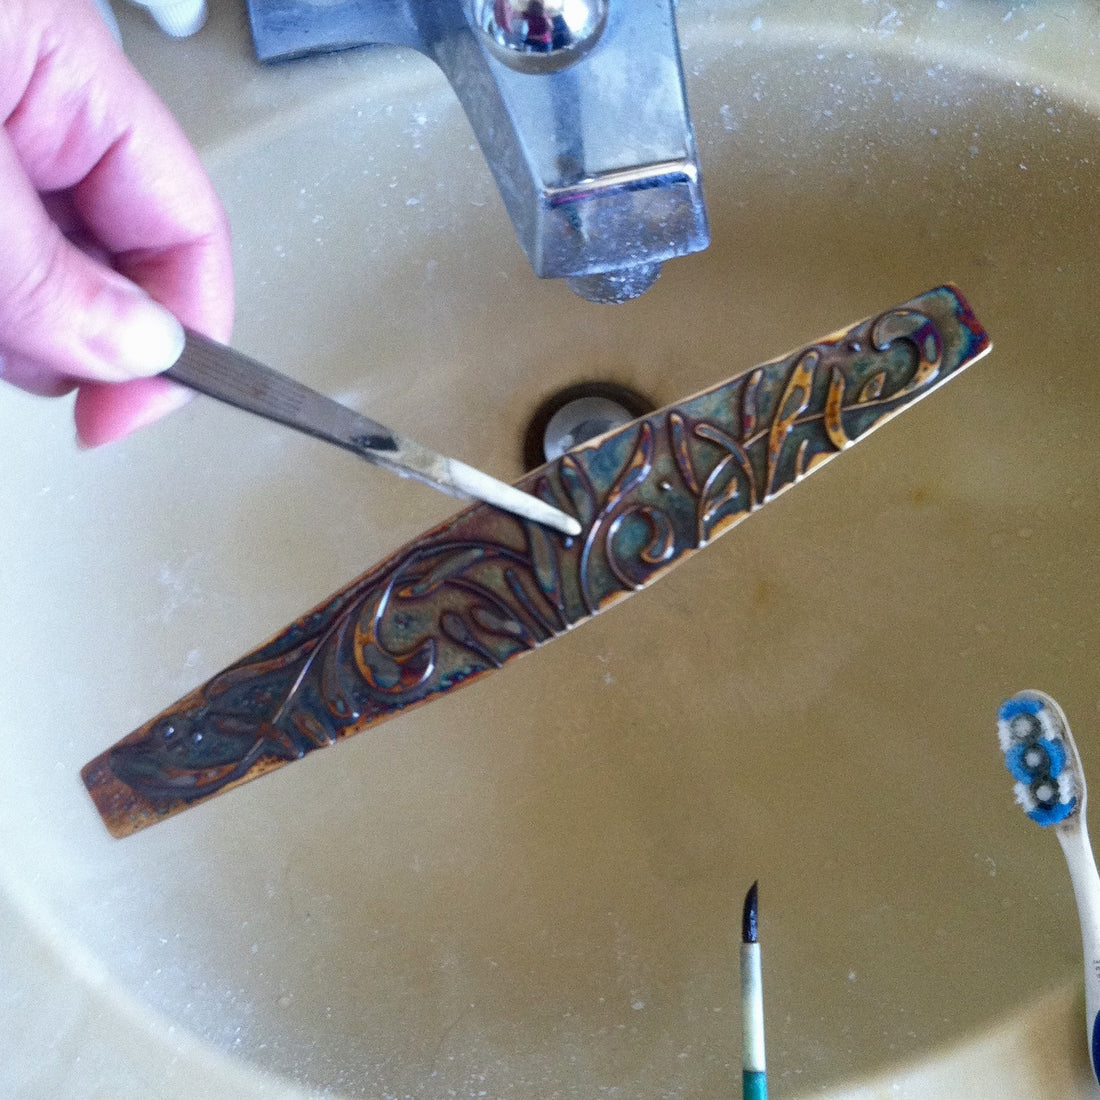 A Peek at Artisan Jewelry in the Making